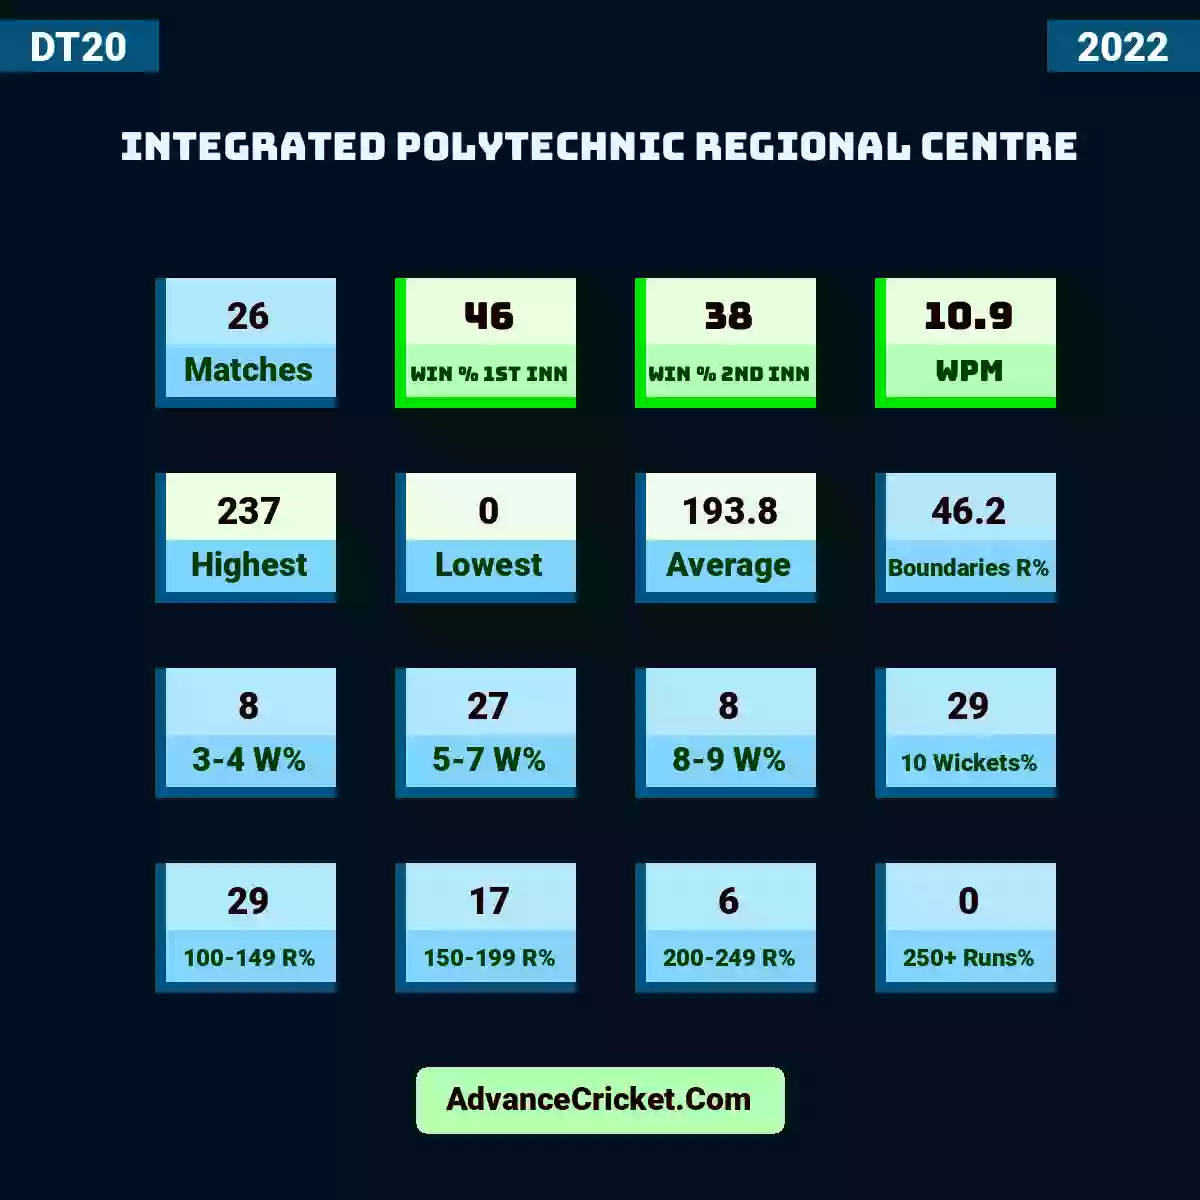 Image showing Integrated Polytechnic Regional Centre with Matches: 26, Win % 1st Inn: 46, Win % 2nd Inn: 38, WPM: 10.9, Highest: 237, Lowest: 0, Average: 193.8, Boundaries R%: 46.2, 3-4 W%: 8, 5-7 W%: 27, 8-9 W%: 8, 10 Wickets%: 29, 100-149 R%: 29, 150-199 R%: 17, 200-249 R%: 6, 250+ Runs%: 0.